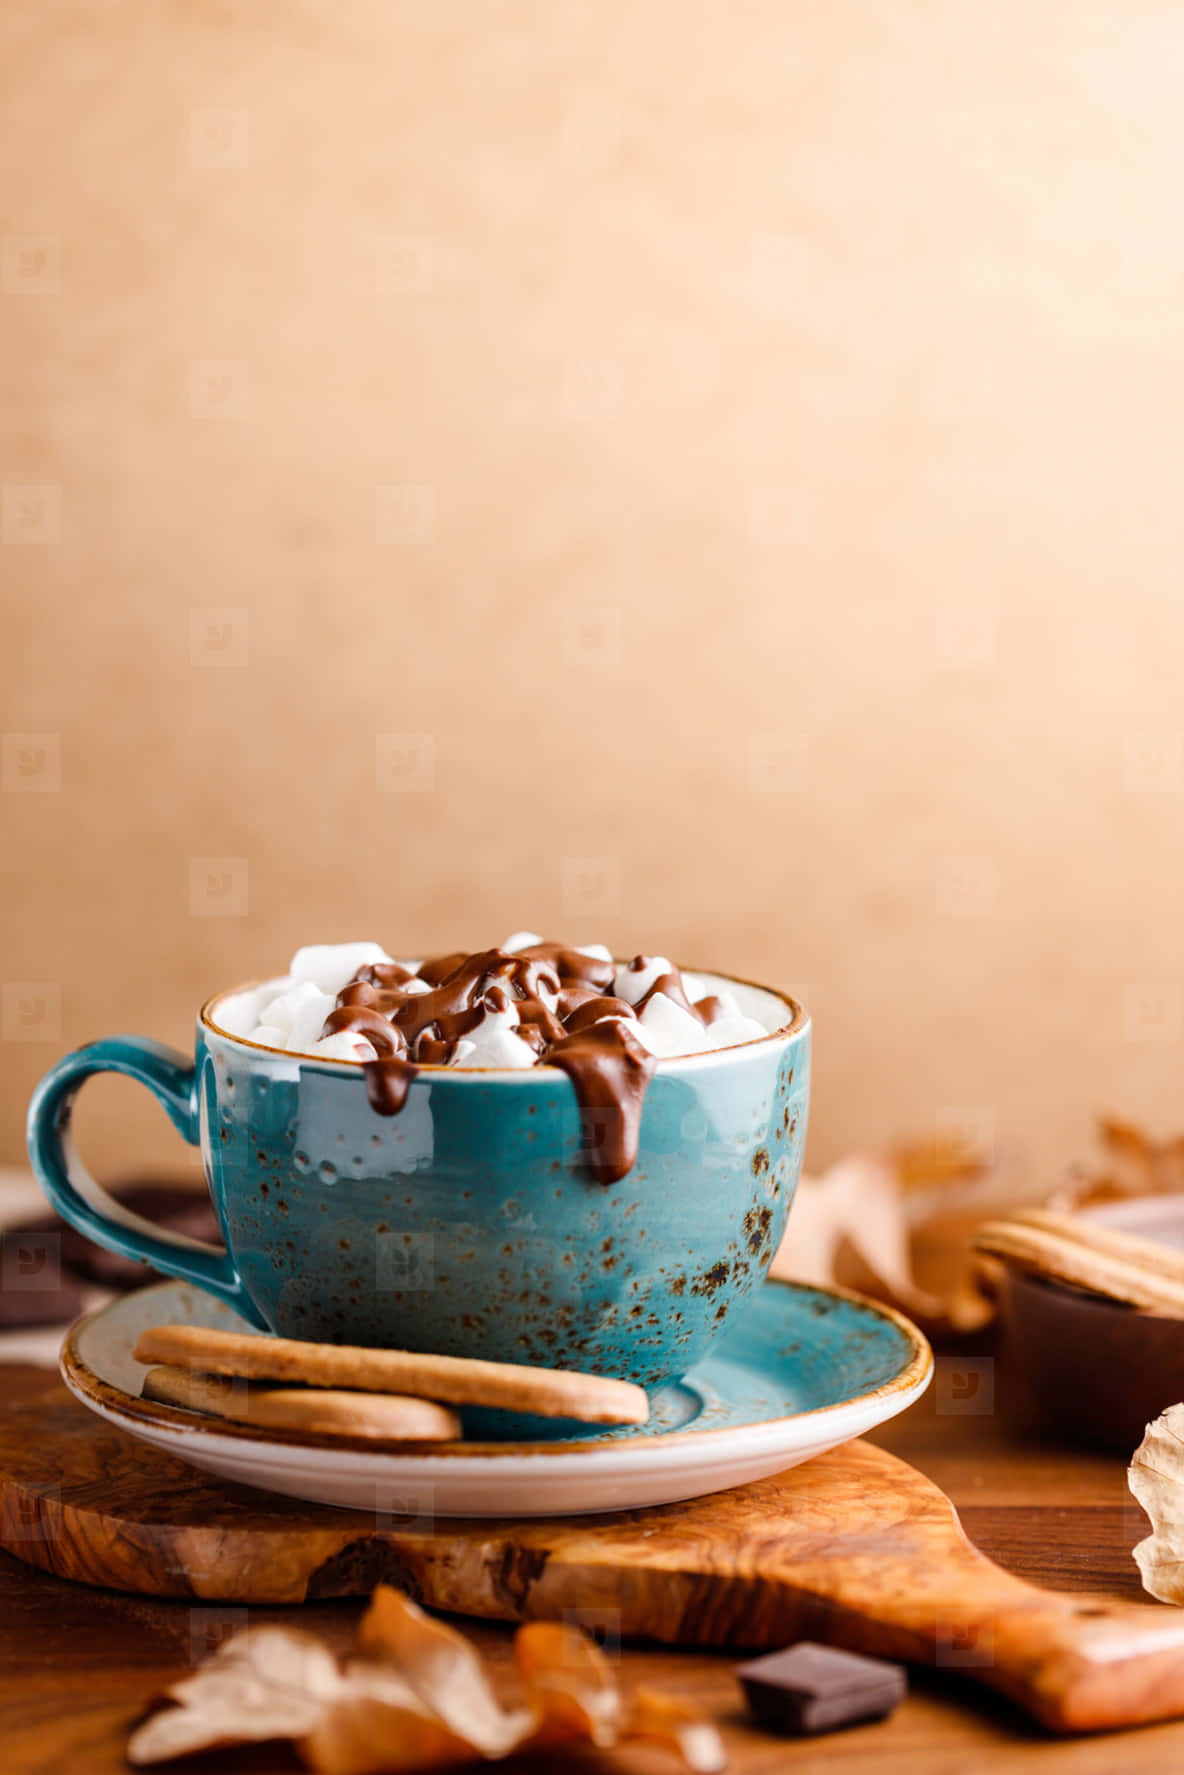 Cozy Hot Chocolate with Whipped Cream Wallpaper